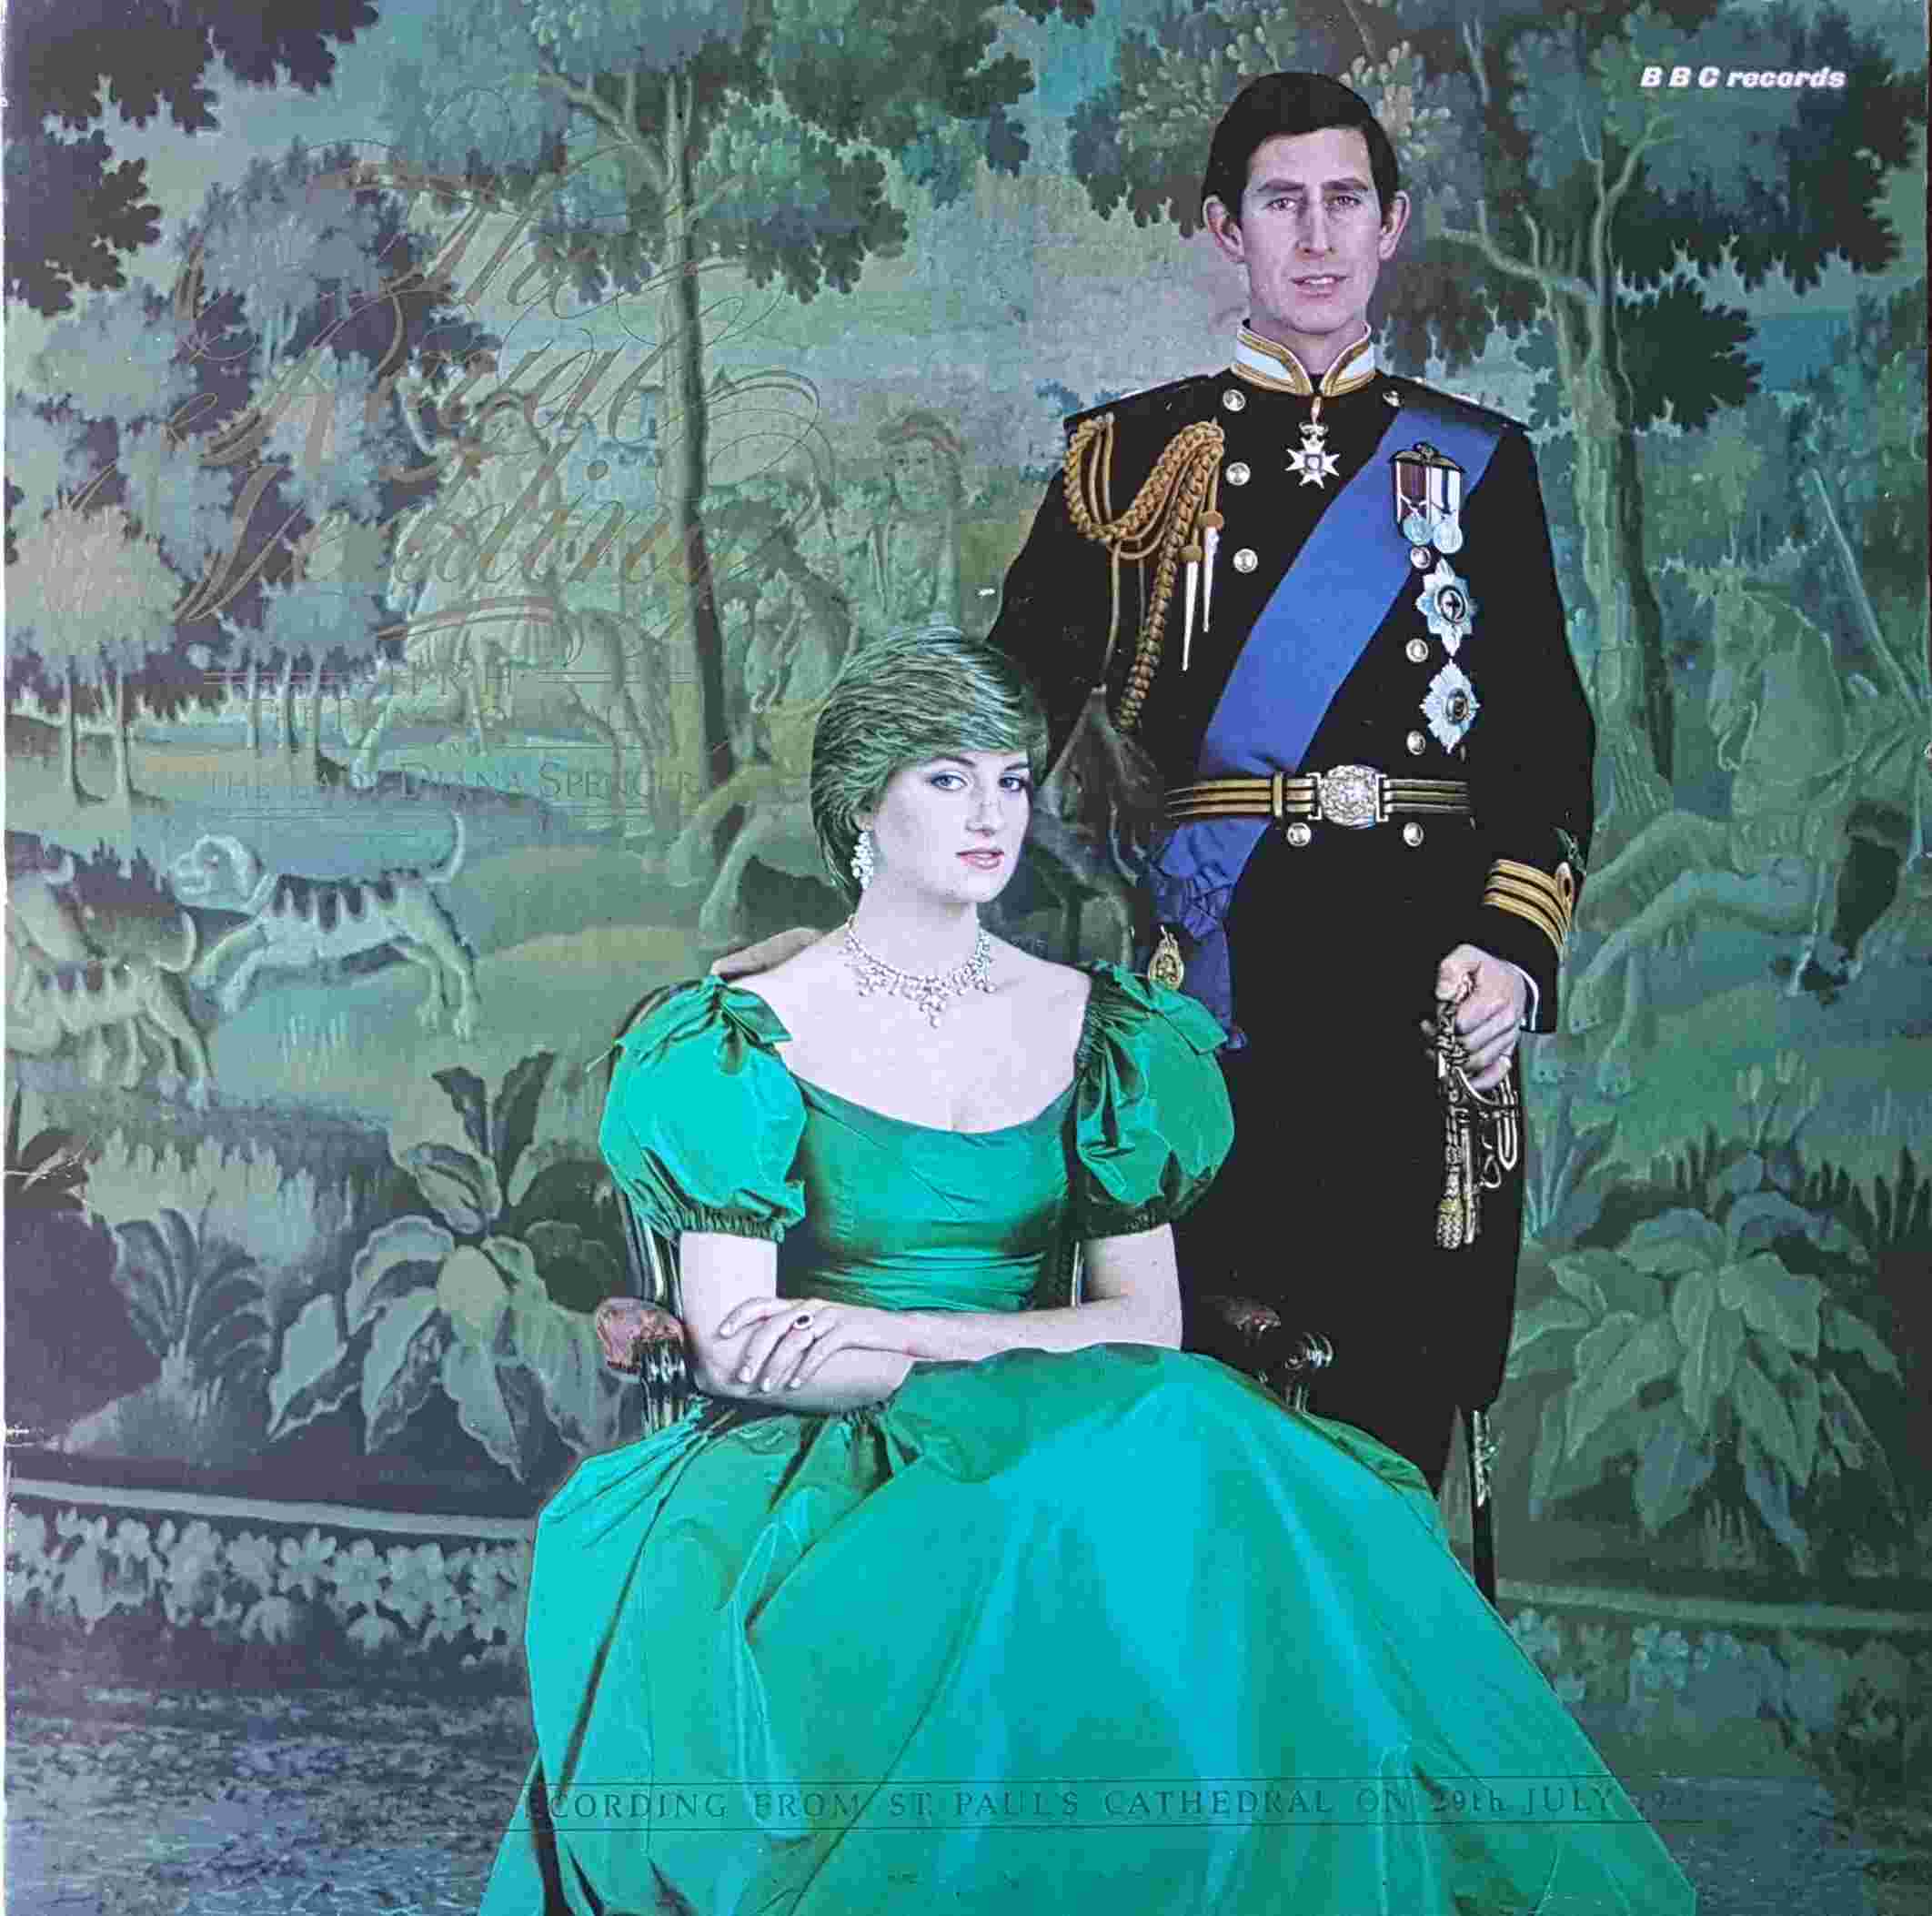 Picture of REP 413 The royal wedding - Prince Charles / Diana Spencer by artist Various